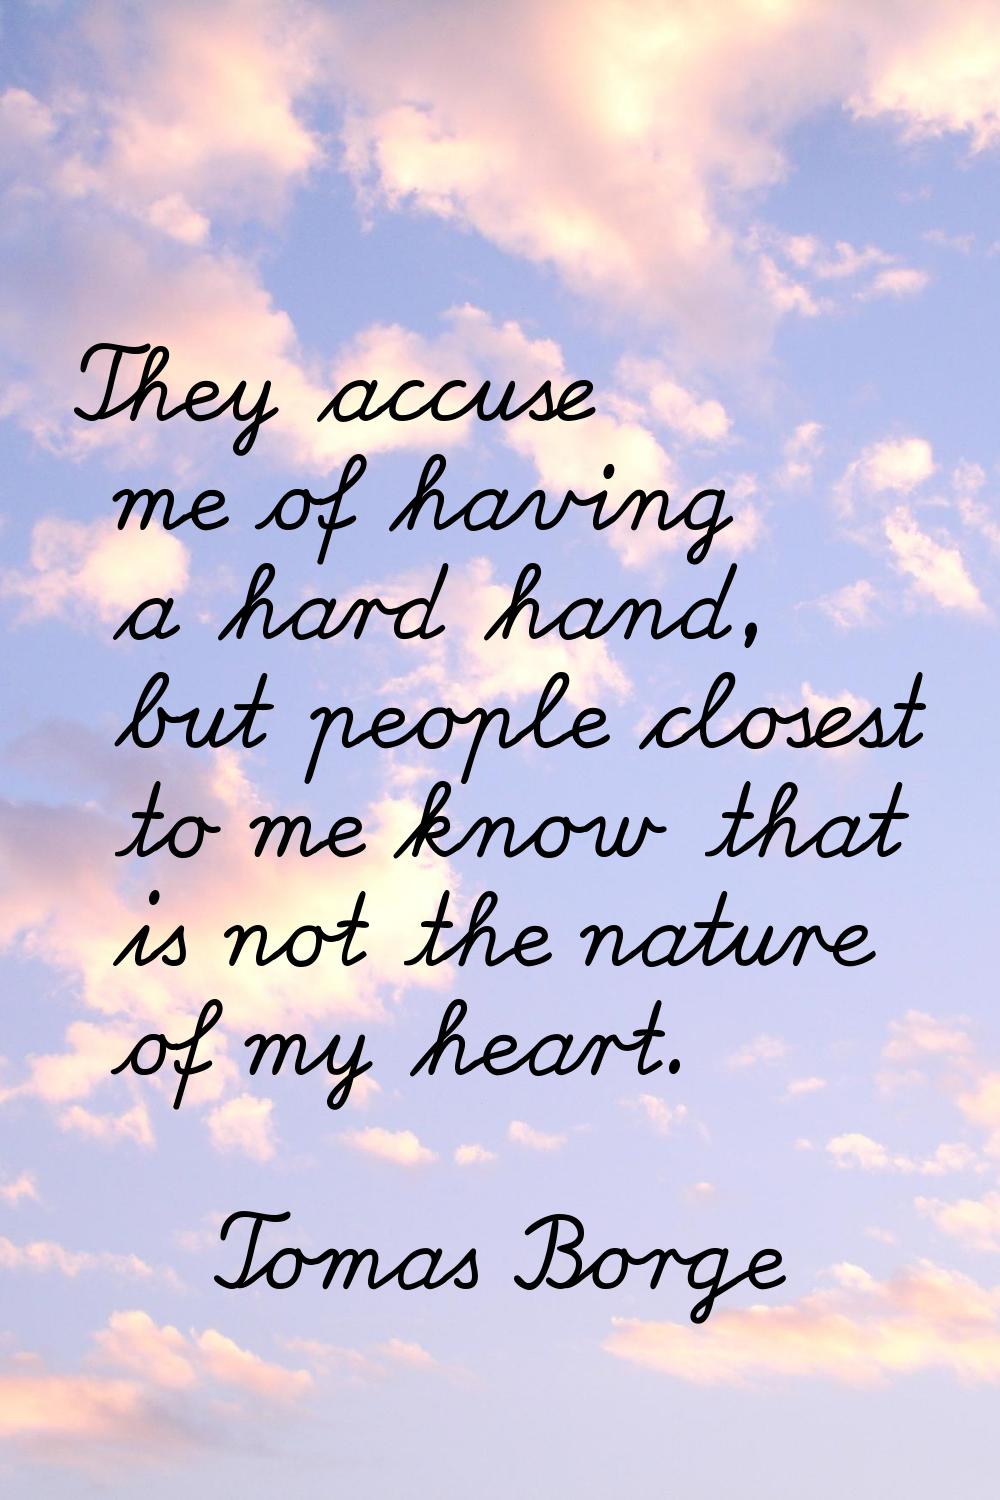 They accuse me of having a hard hand, but people closest to me know that is not the nature of my he